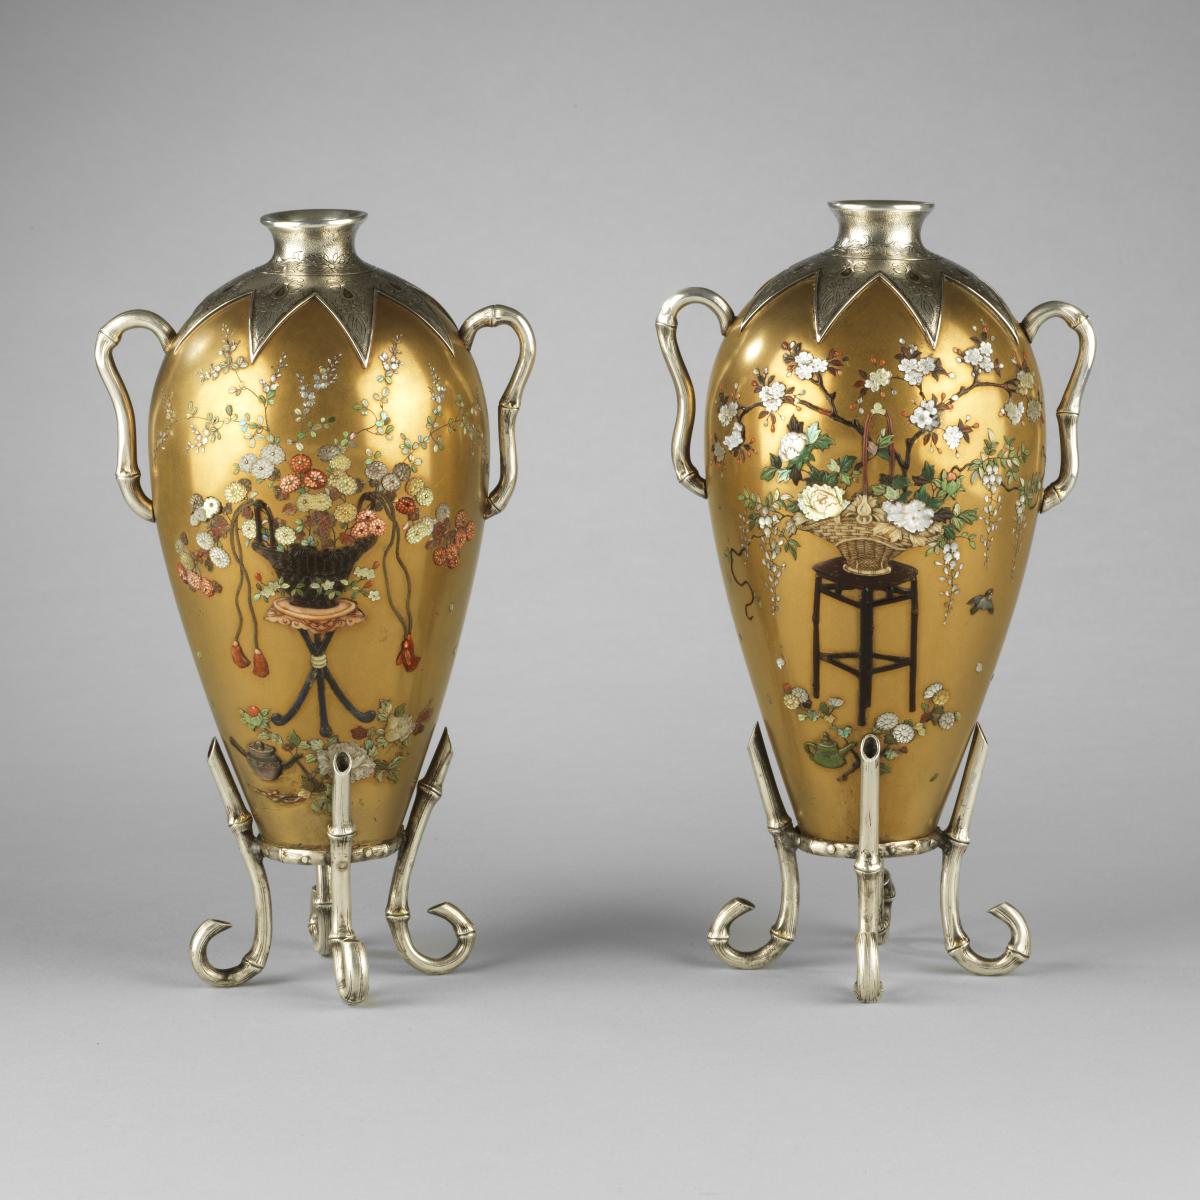 Japanese shibayama inlaid pair of gold lacquer vases, late Meiji Period